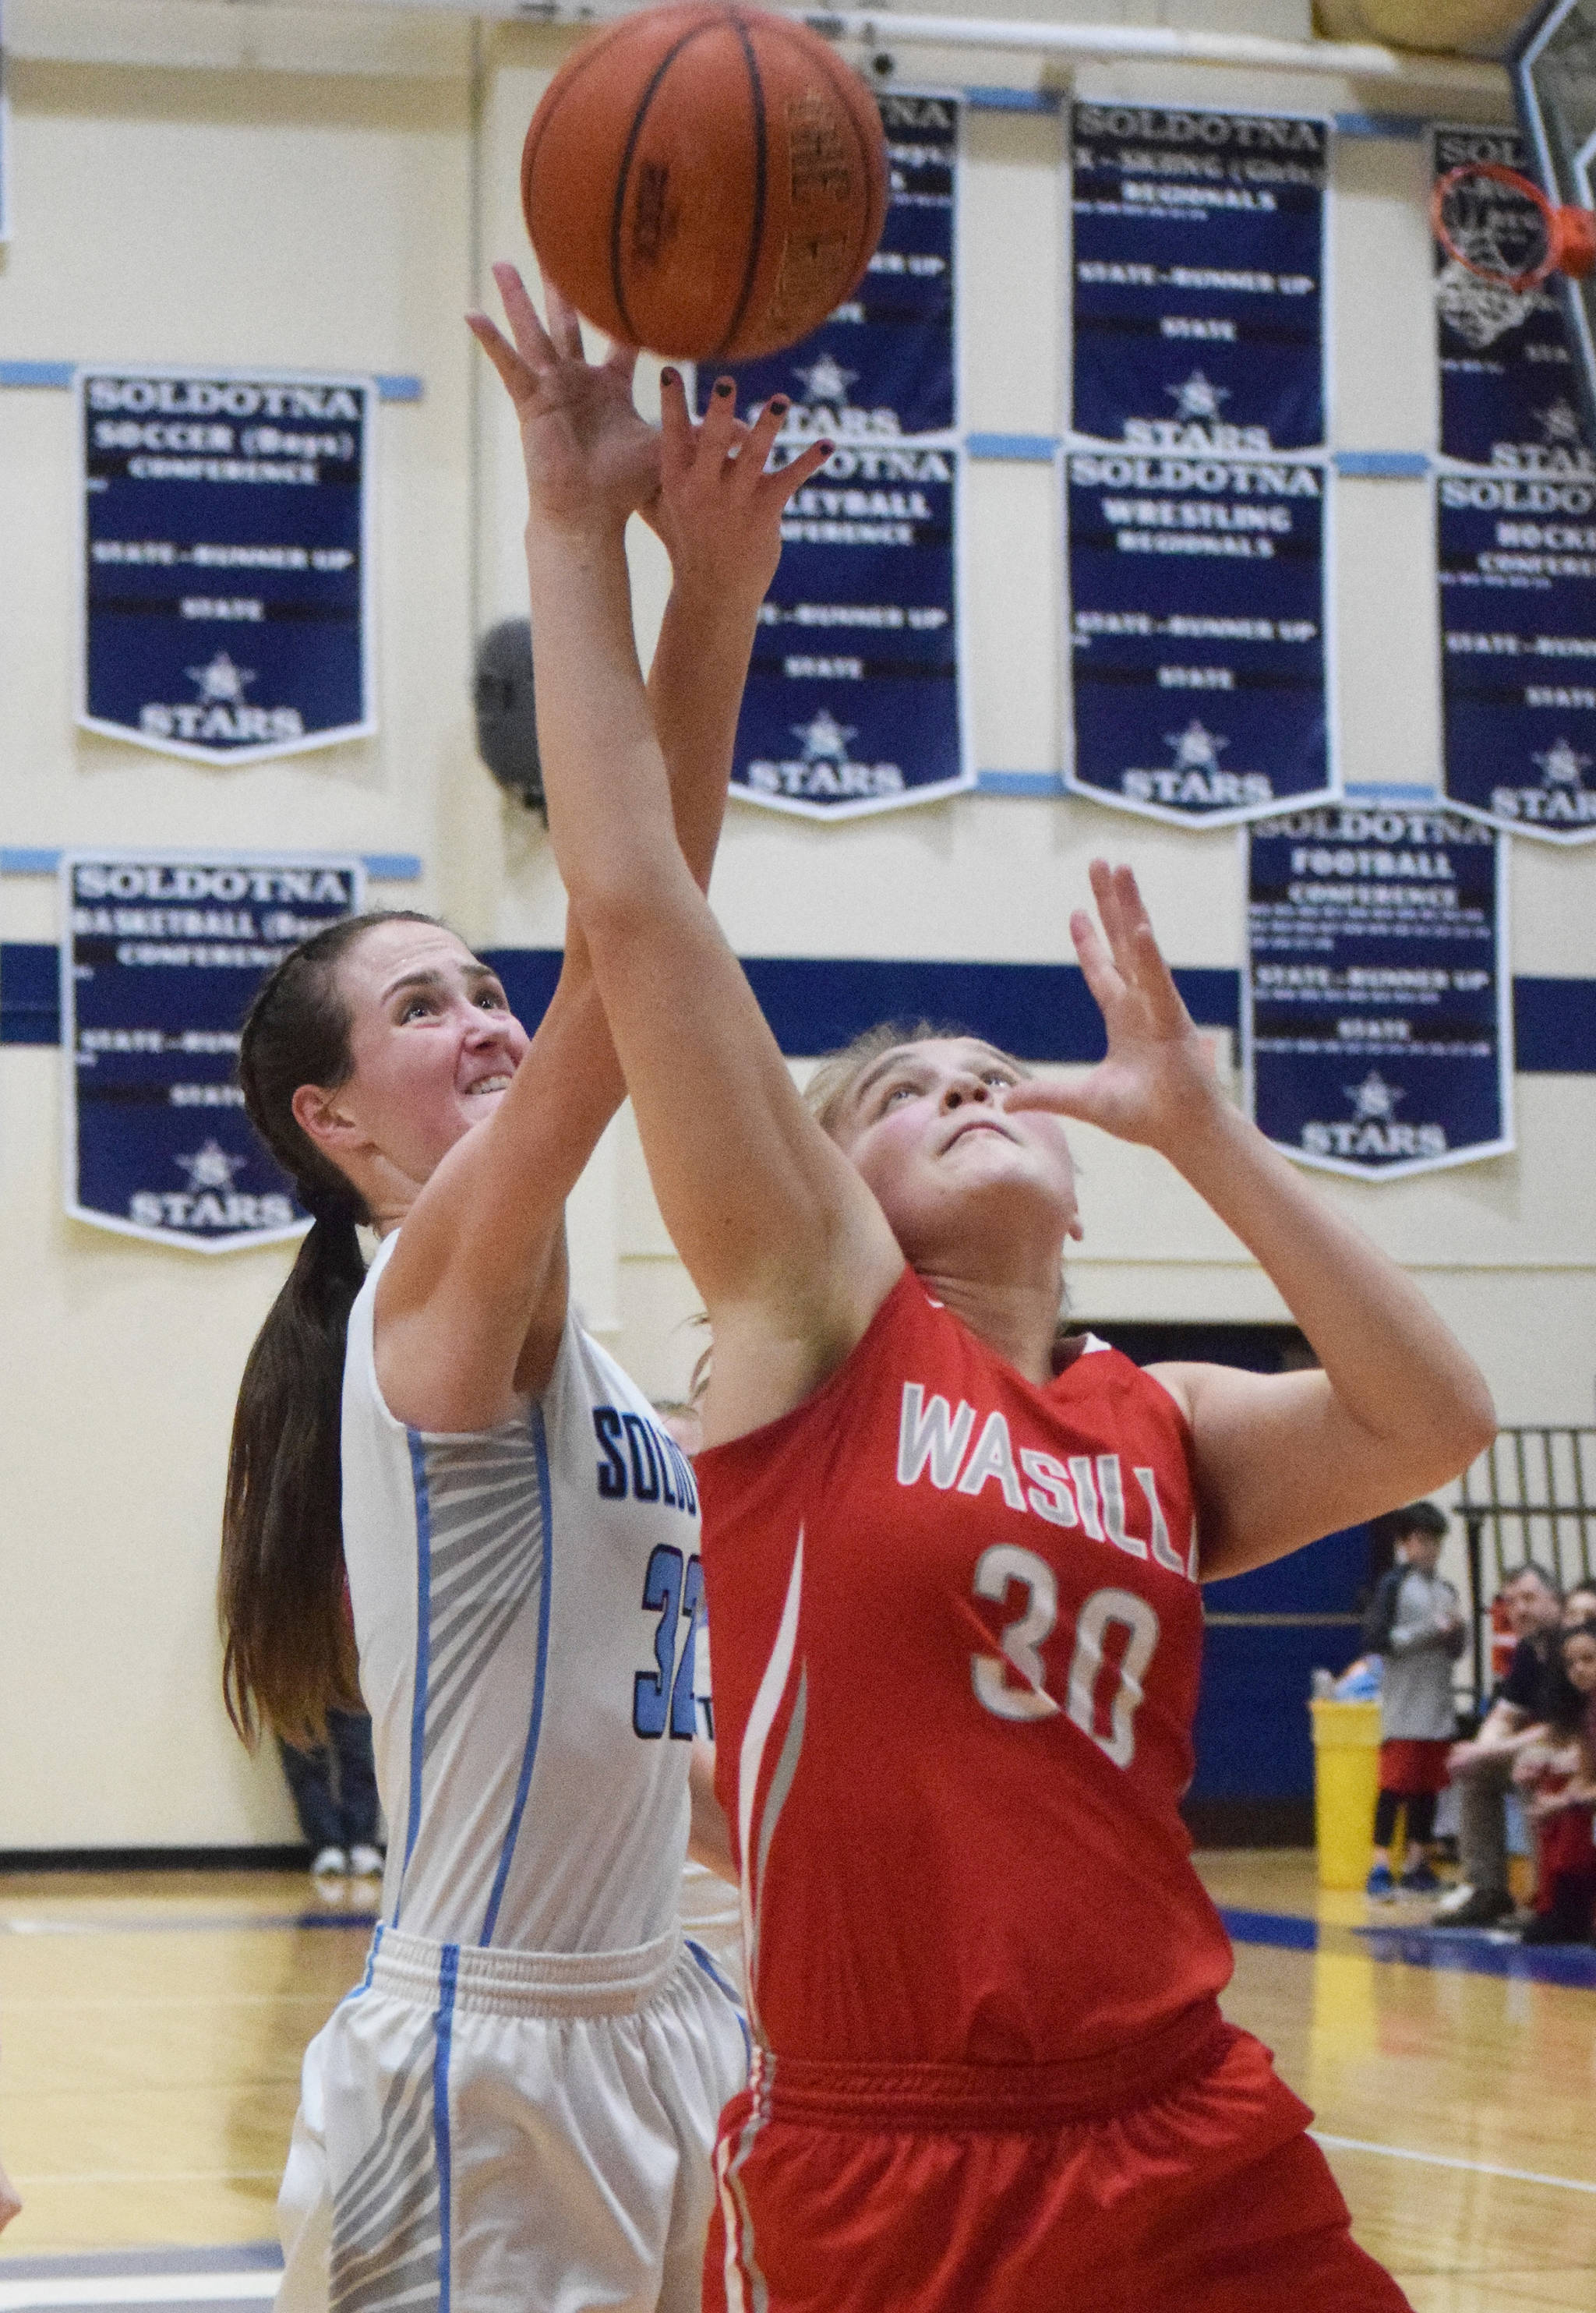 Wasilla’s Diondra Lawhead attempts to block a shot from Soldotna’s Danica Schmidt Saturday in the Northern Lights Conference girls championship at Soldotna High School. (Photo by Joey Klecka/Peninsula Clarion)